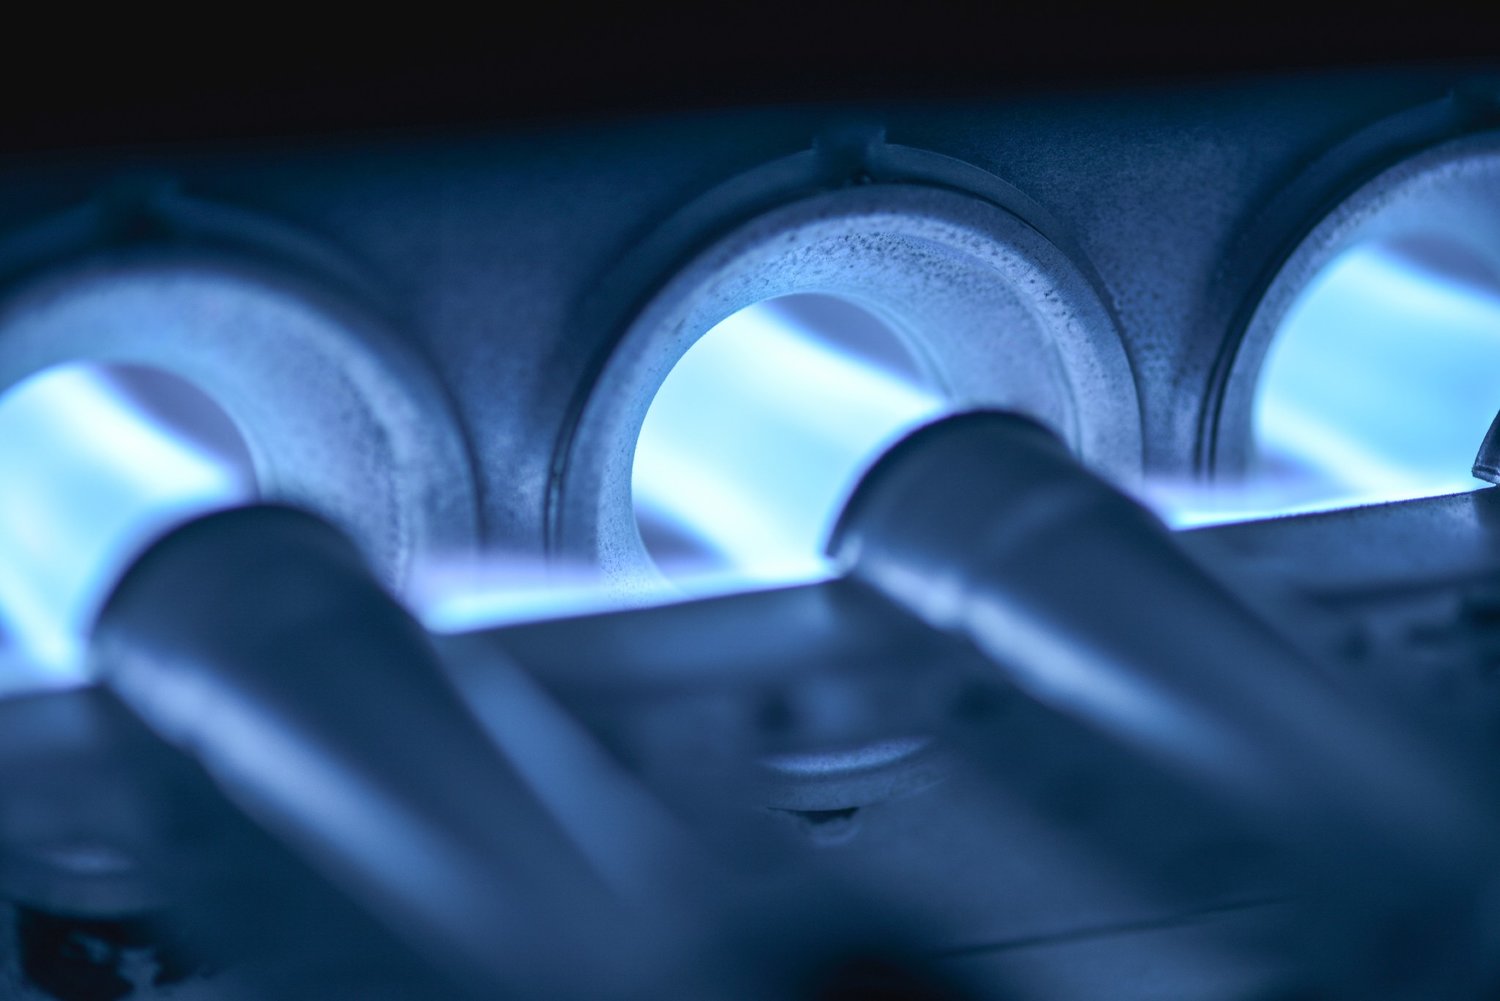 PRESEASON INSPECTION — The white-hot flames of a natural gas furnace are shown in this file photo from National Grid. The utility company urges residents to have annual inspections of all home heating sources, like natural gas furnaces, to ensure optimal operation and identify safety risks like carbon monoxide leaks.